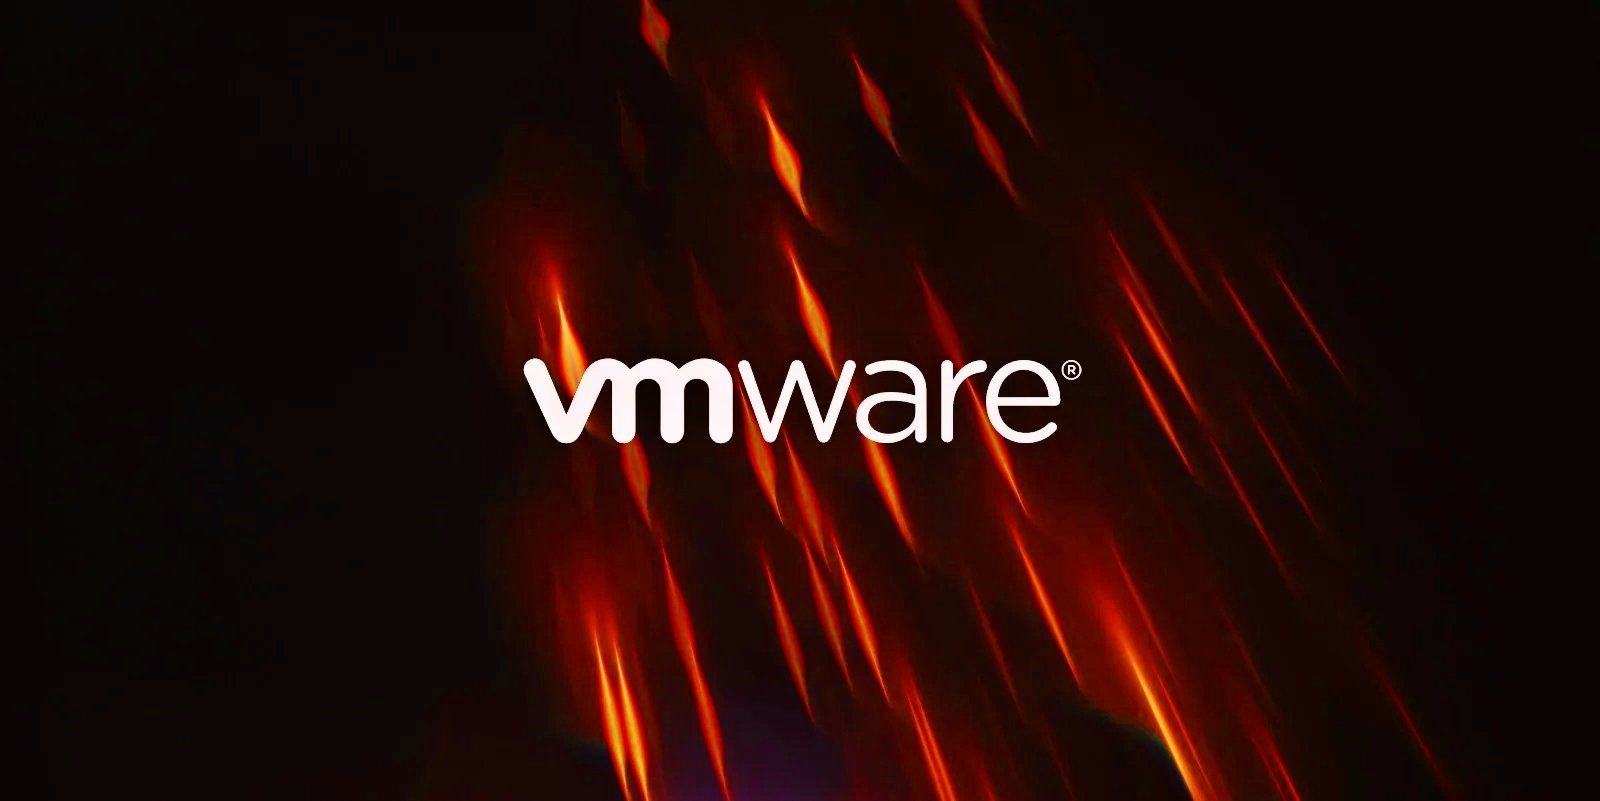 VMWARE | SOSECURE MORE THAN SECURE